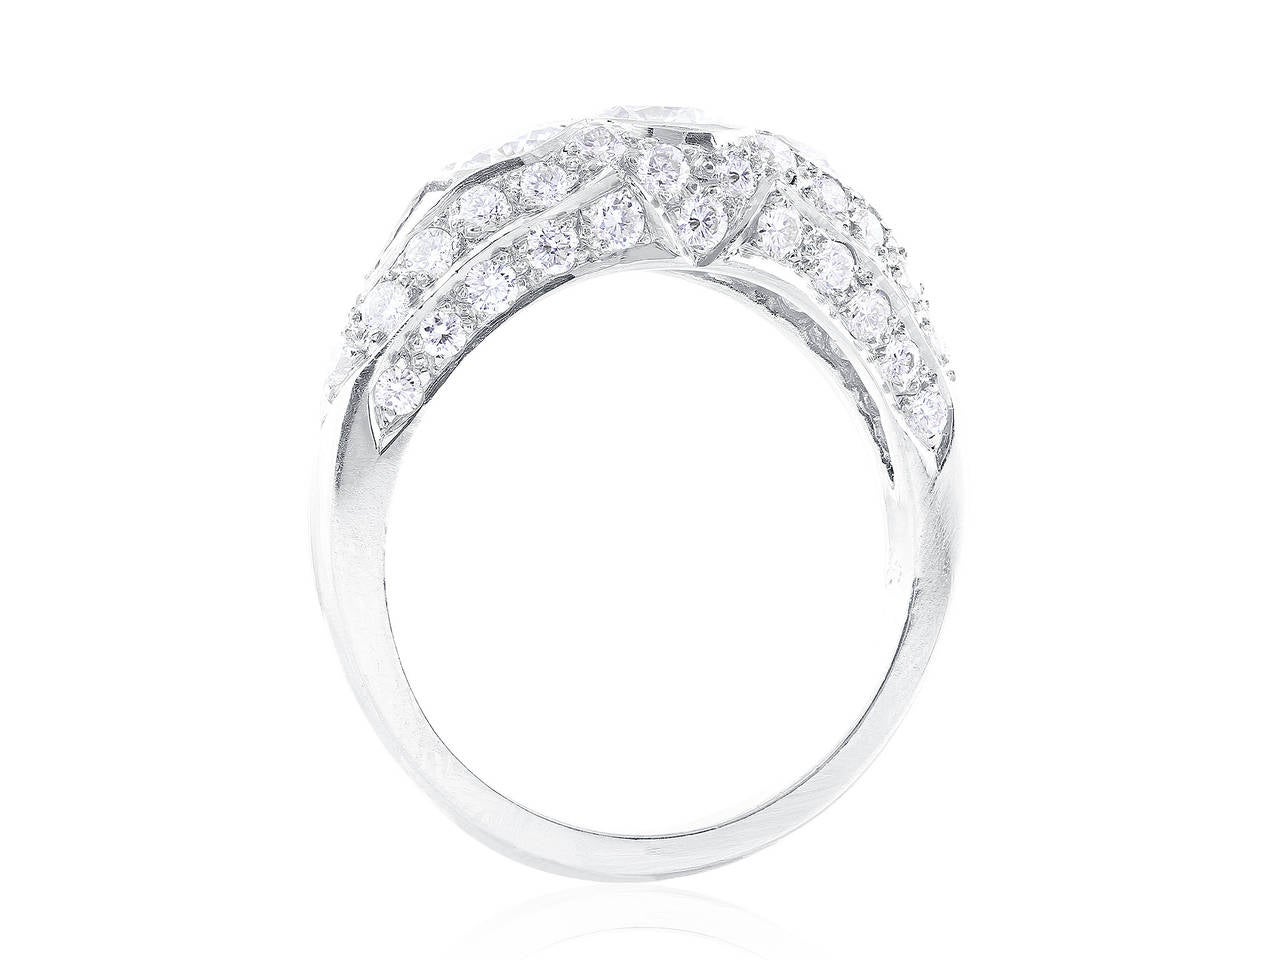 Platinum Art Deco style ring consisting of one bezel set, round brilliant cut diamond weighing .54 carats set with 2 full  cut diamonds having a total weight of 0.51 carat, 2 bezel set, trilliant cut diamonds having a total weight of 0.11 carat and